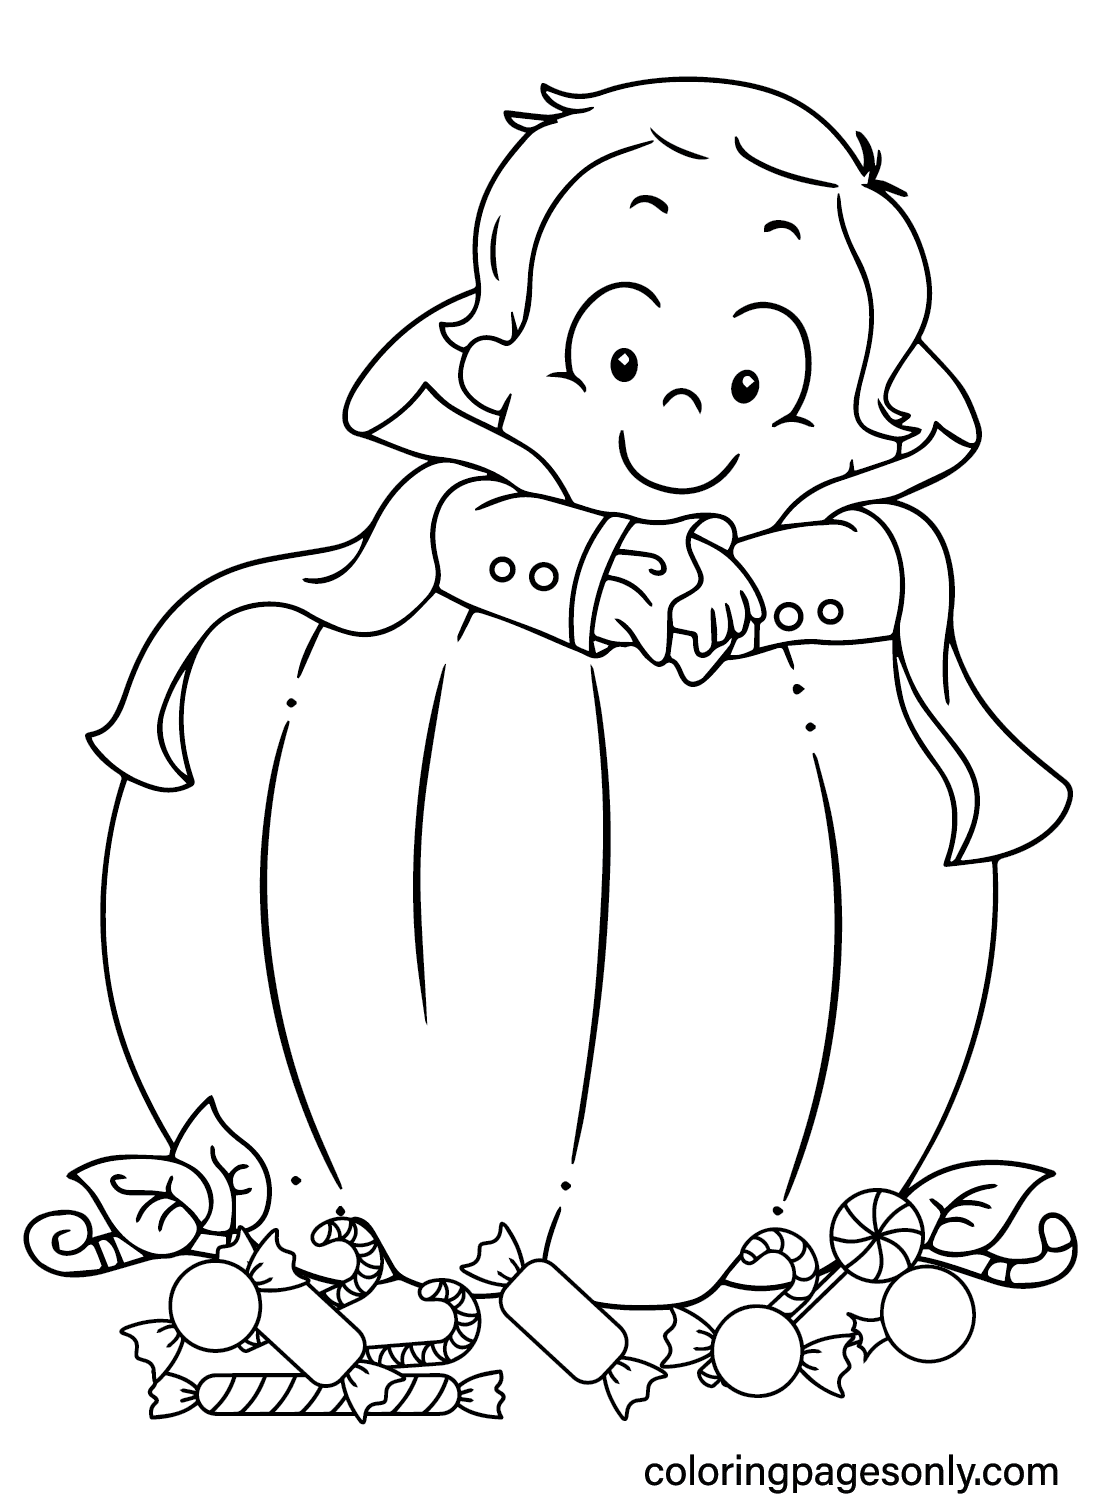 Cute Halloween Picture to Color from Cute Halloween